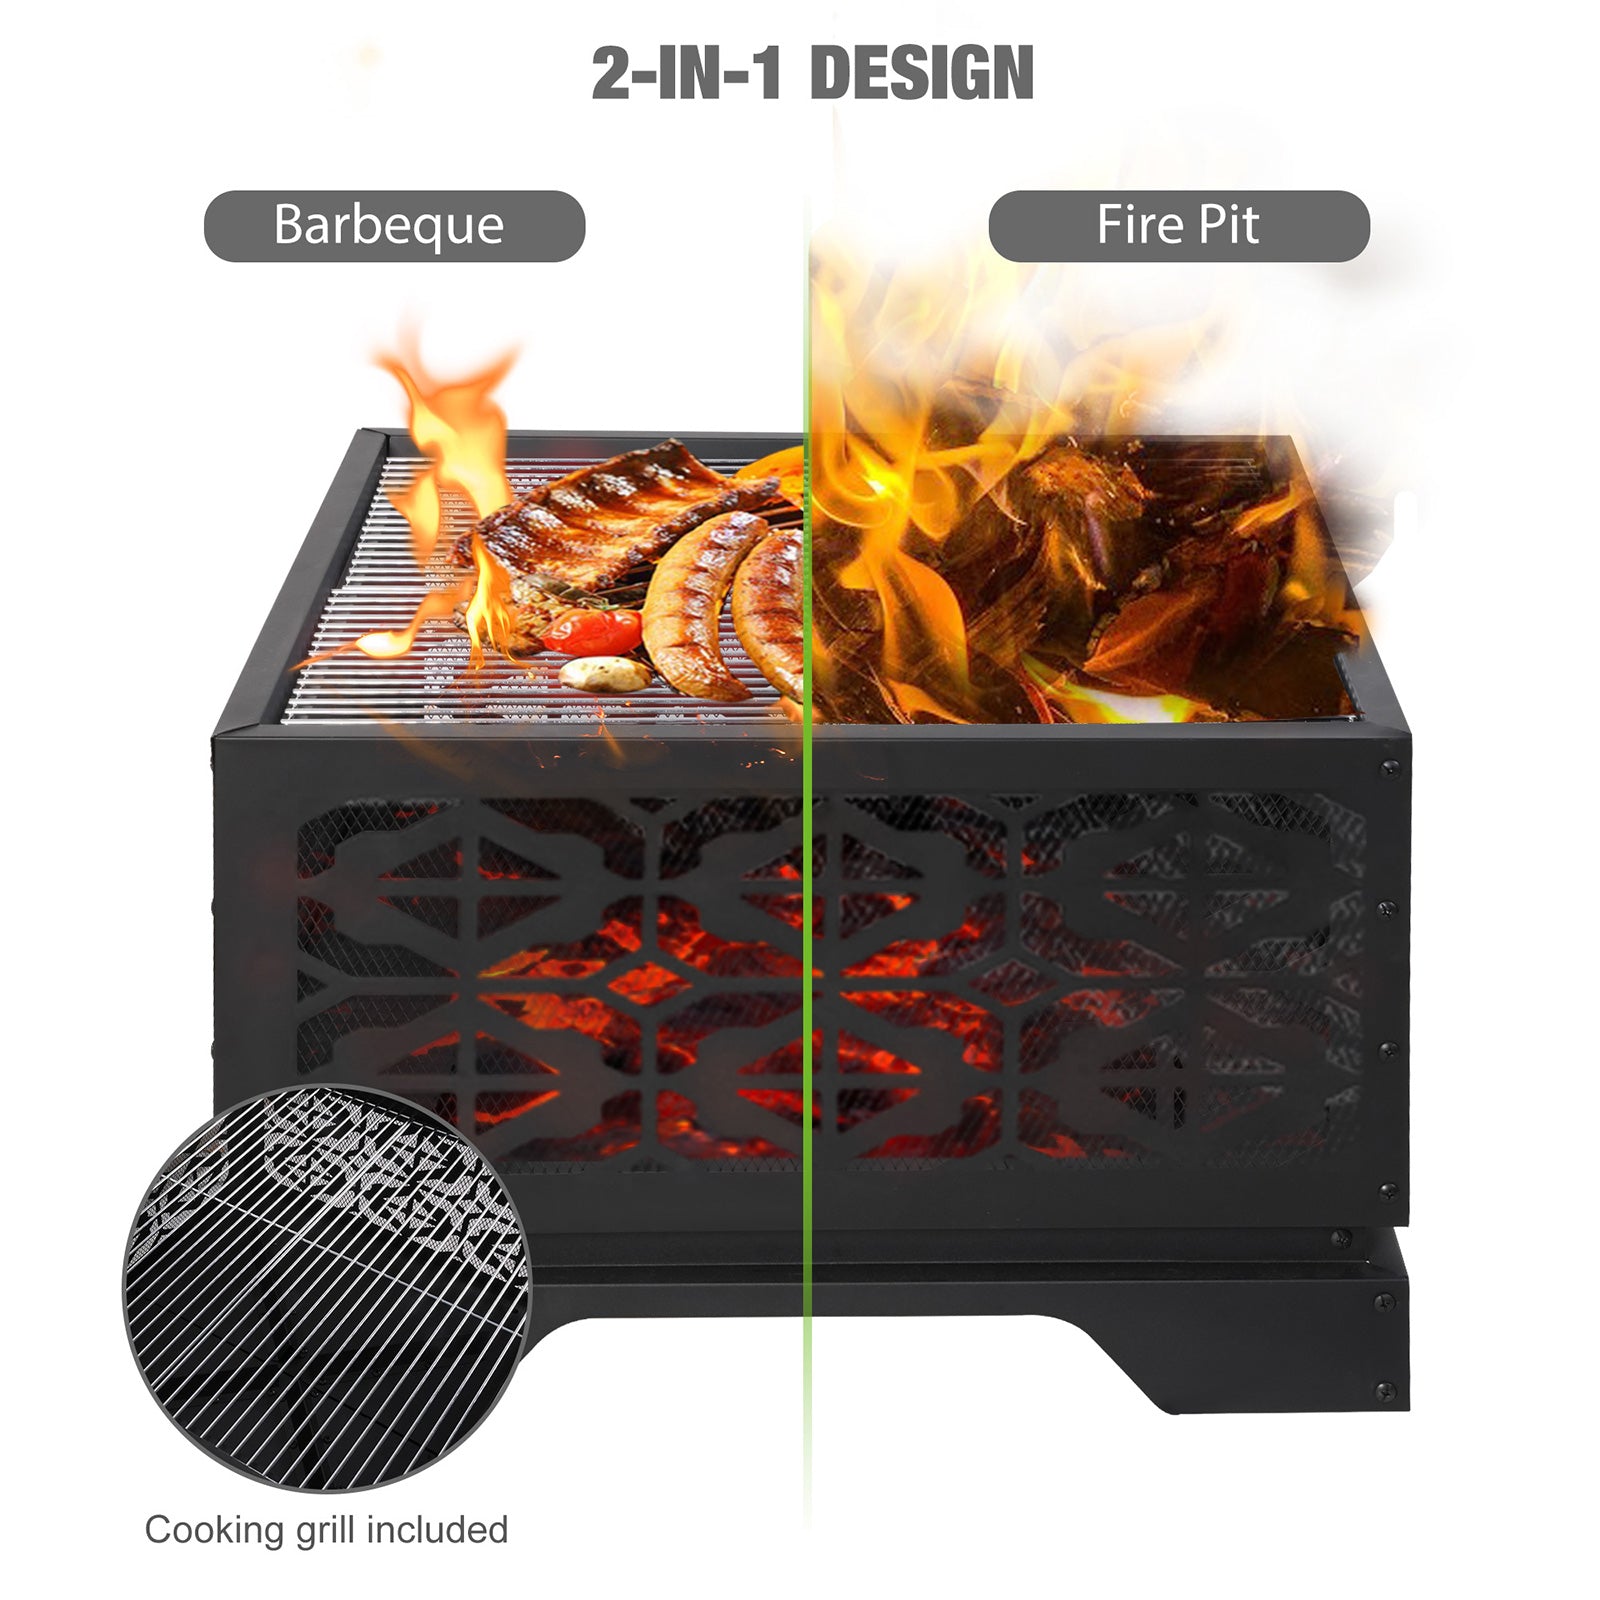 Square Outdoor Wood Burning Fire Pit 26" with Steel BBQ Grill, Spark Screen and Poker